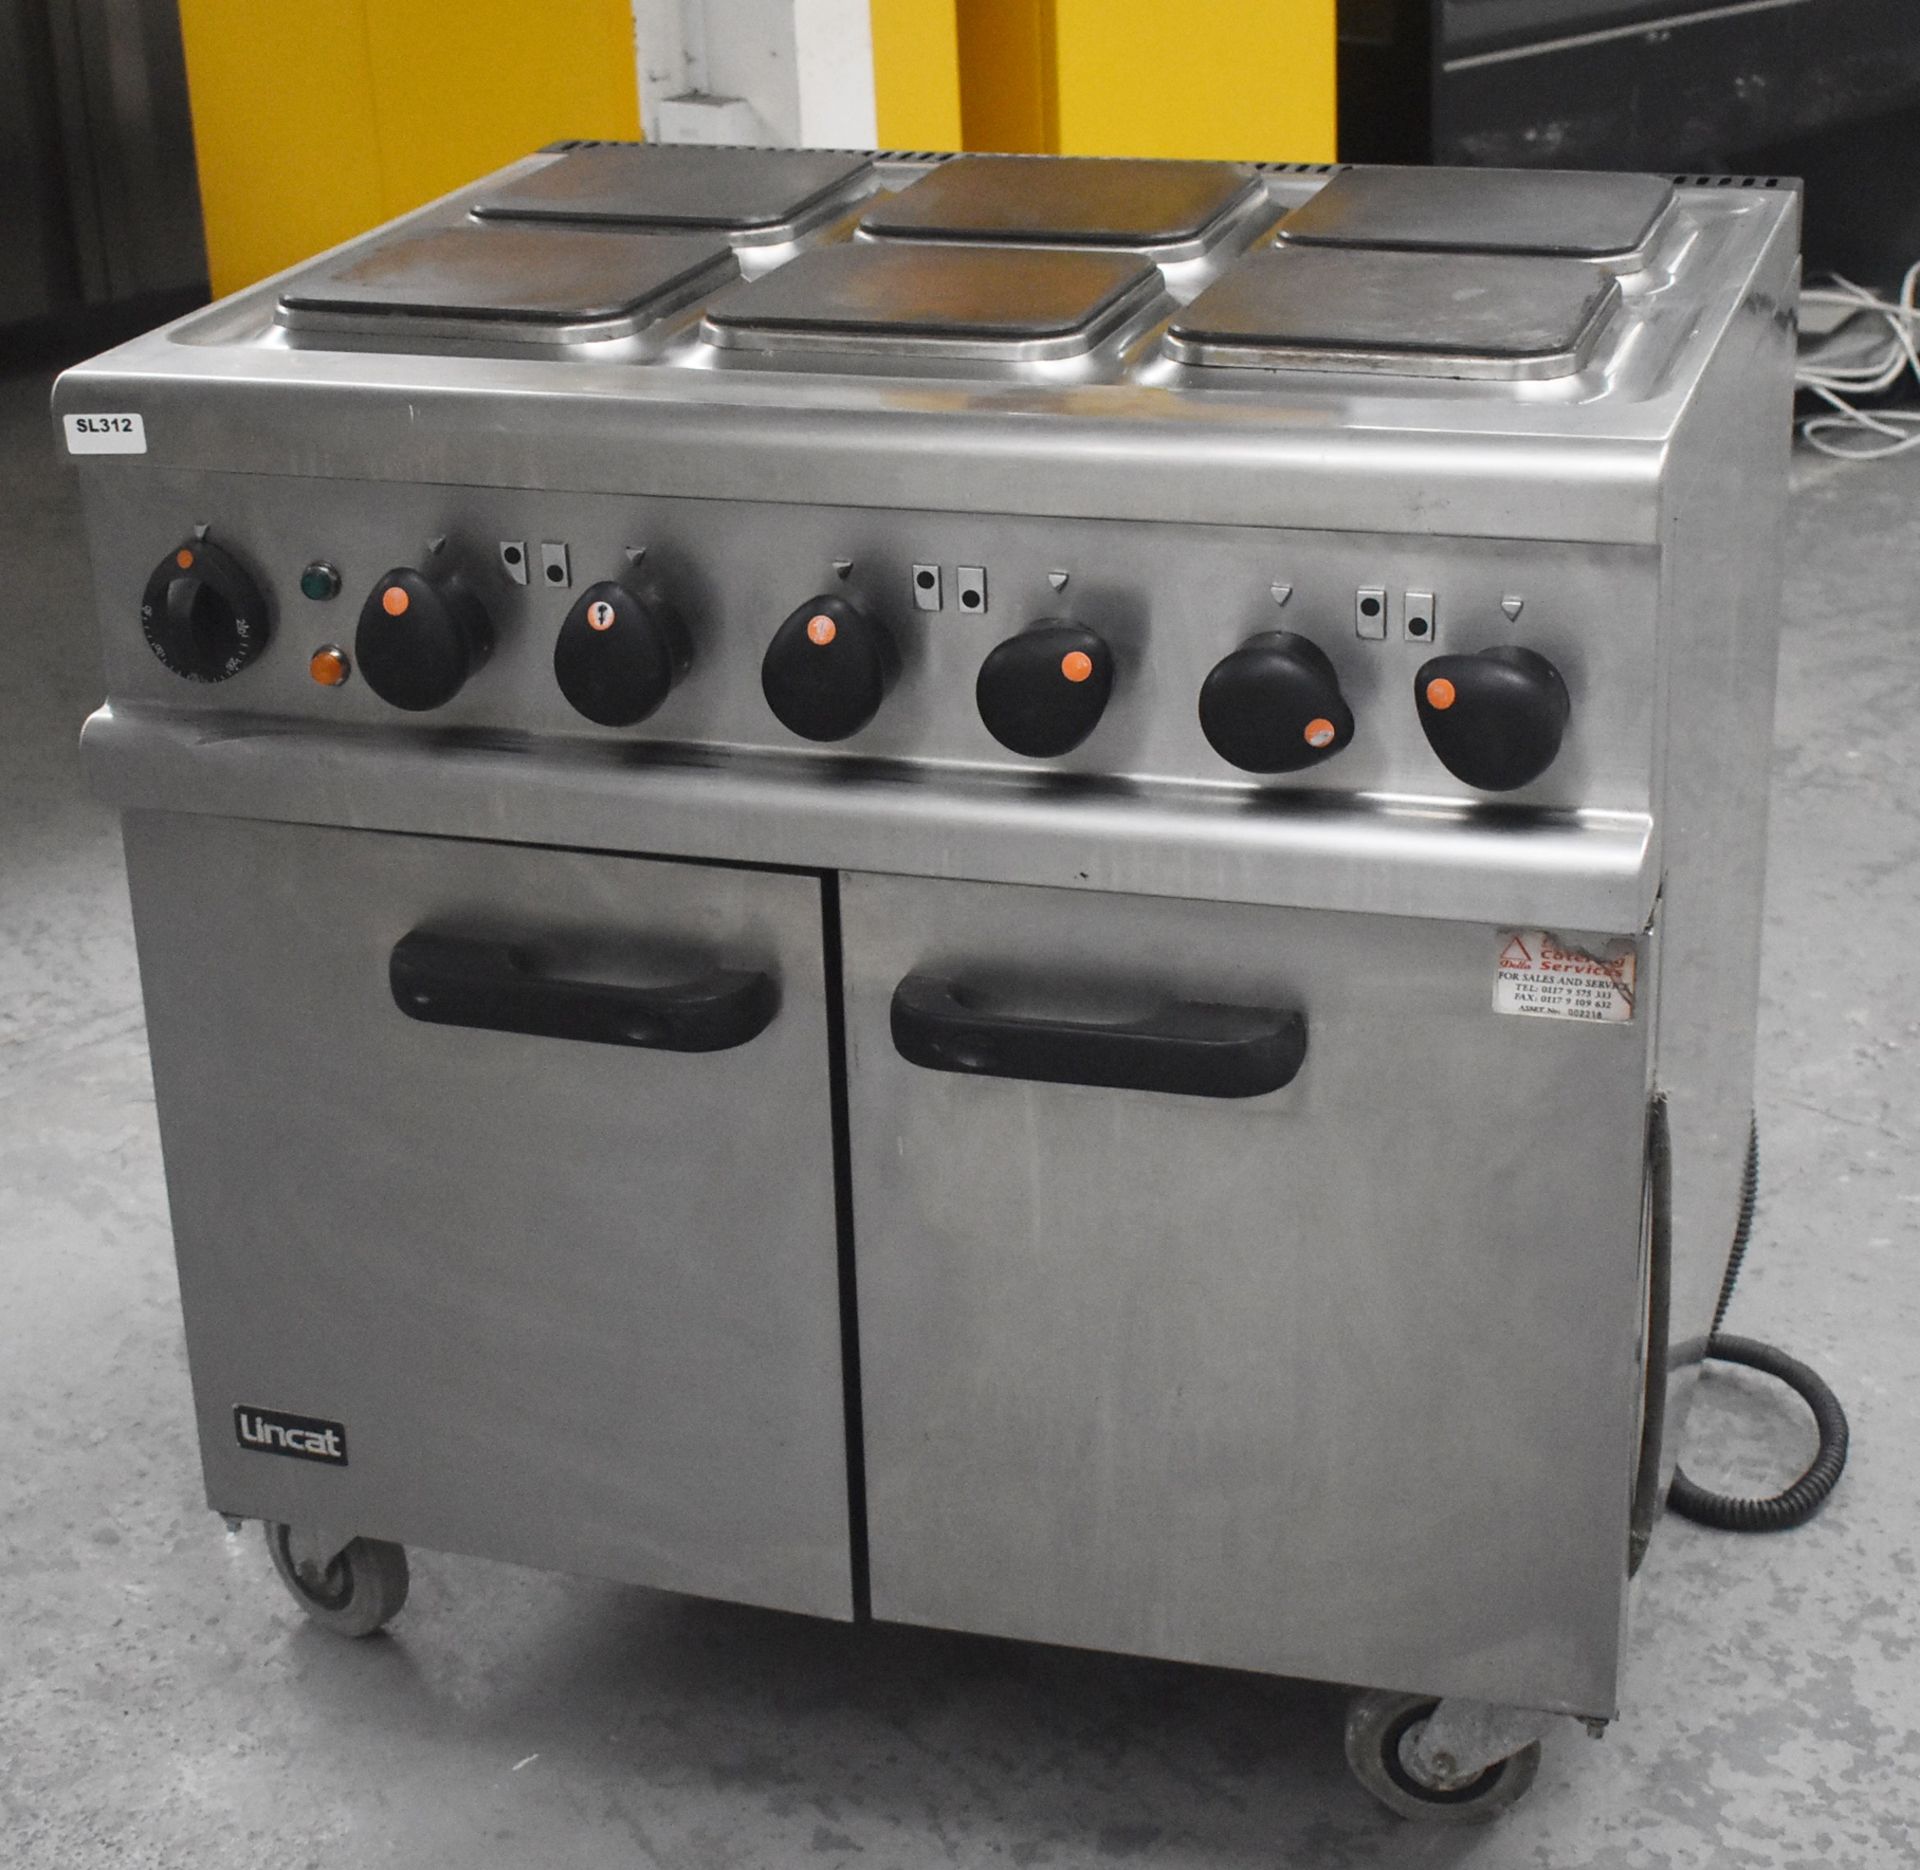 1 x Lincat Electric 6 Burner Range Cooker With Stainless Steel Exterior - Recently Removed from a